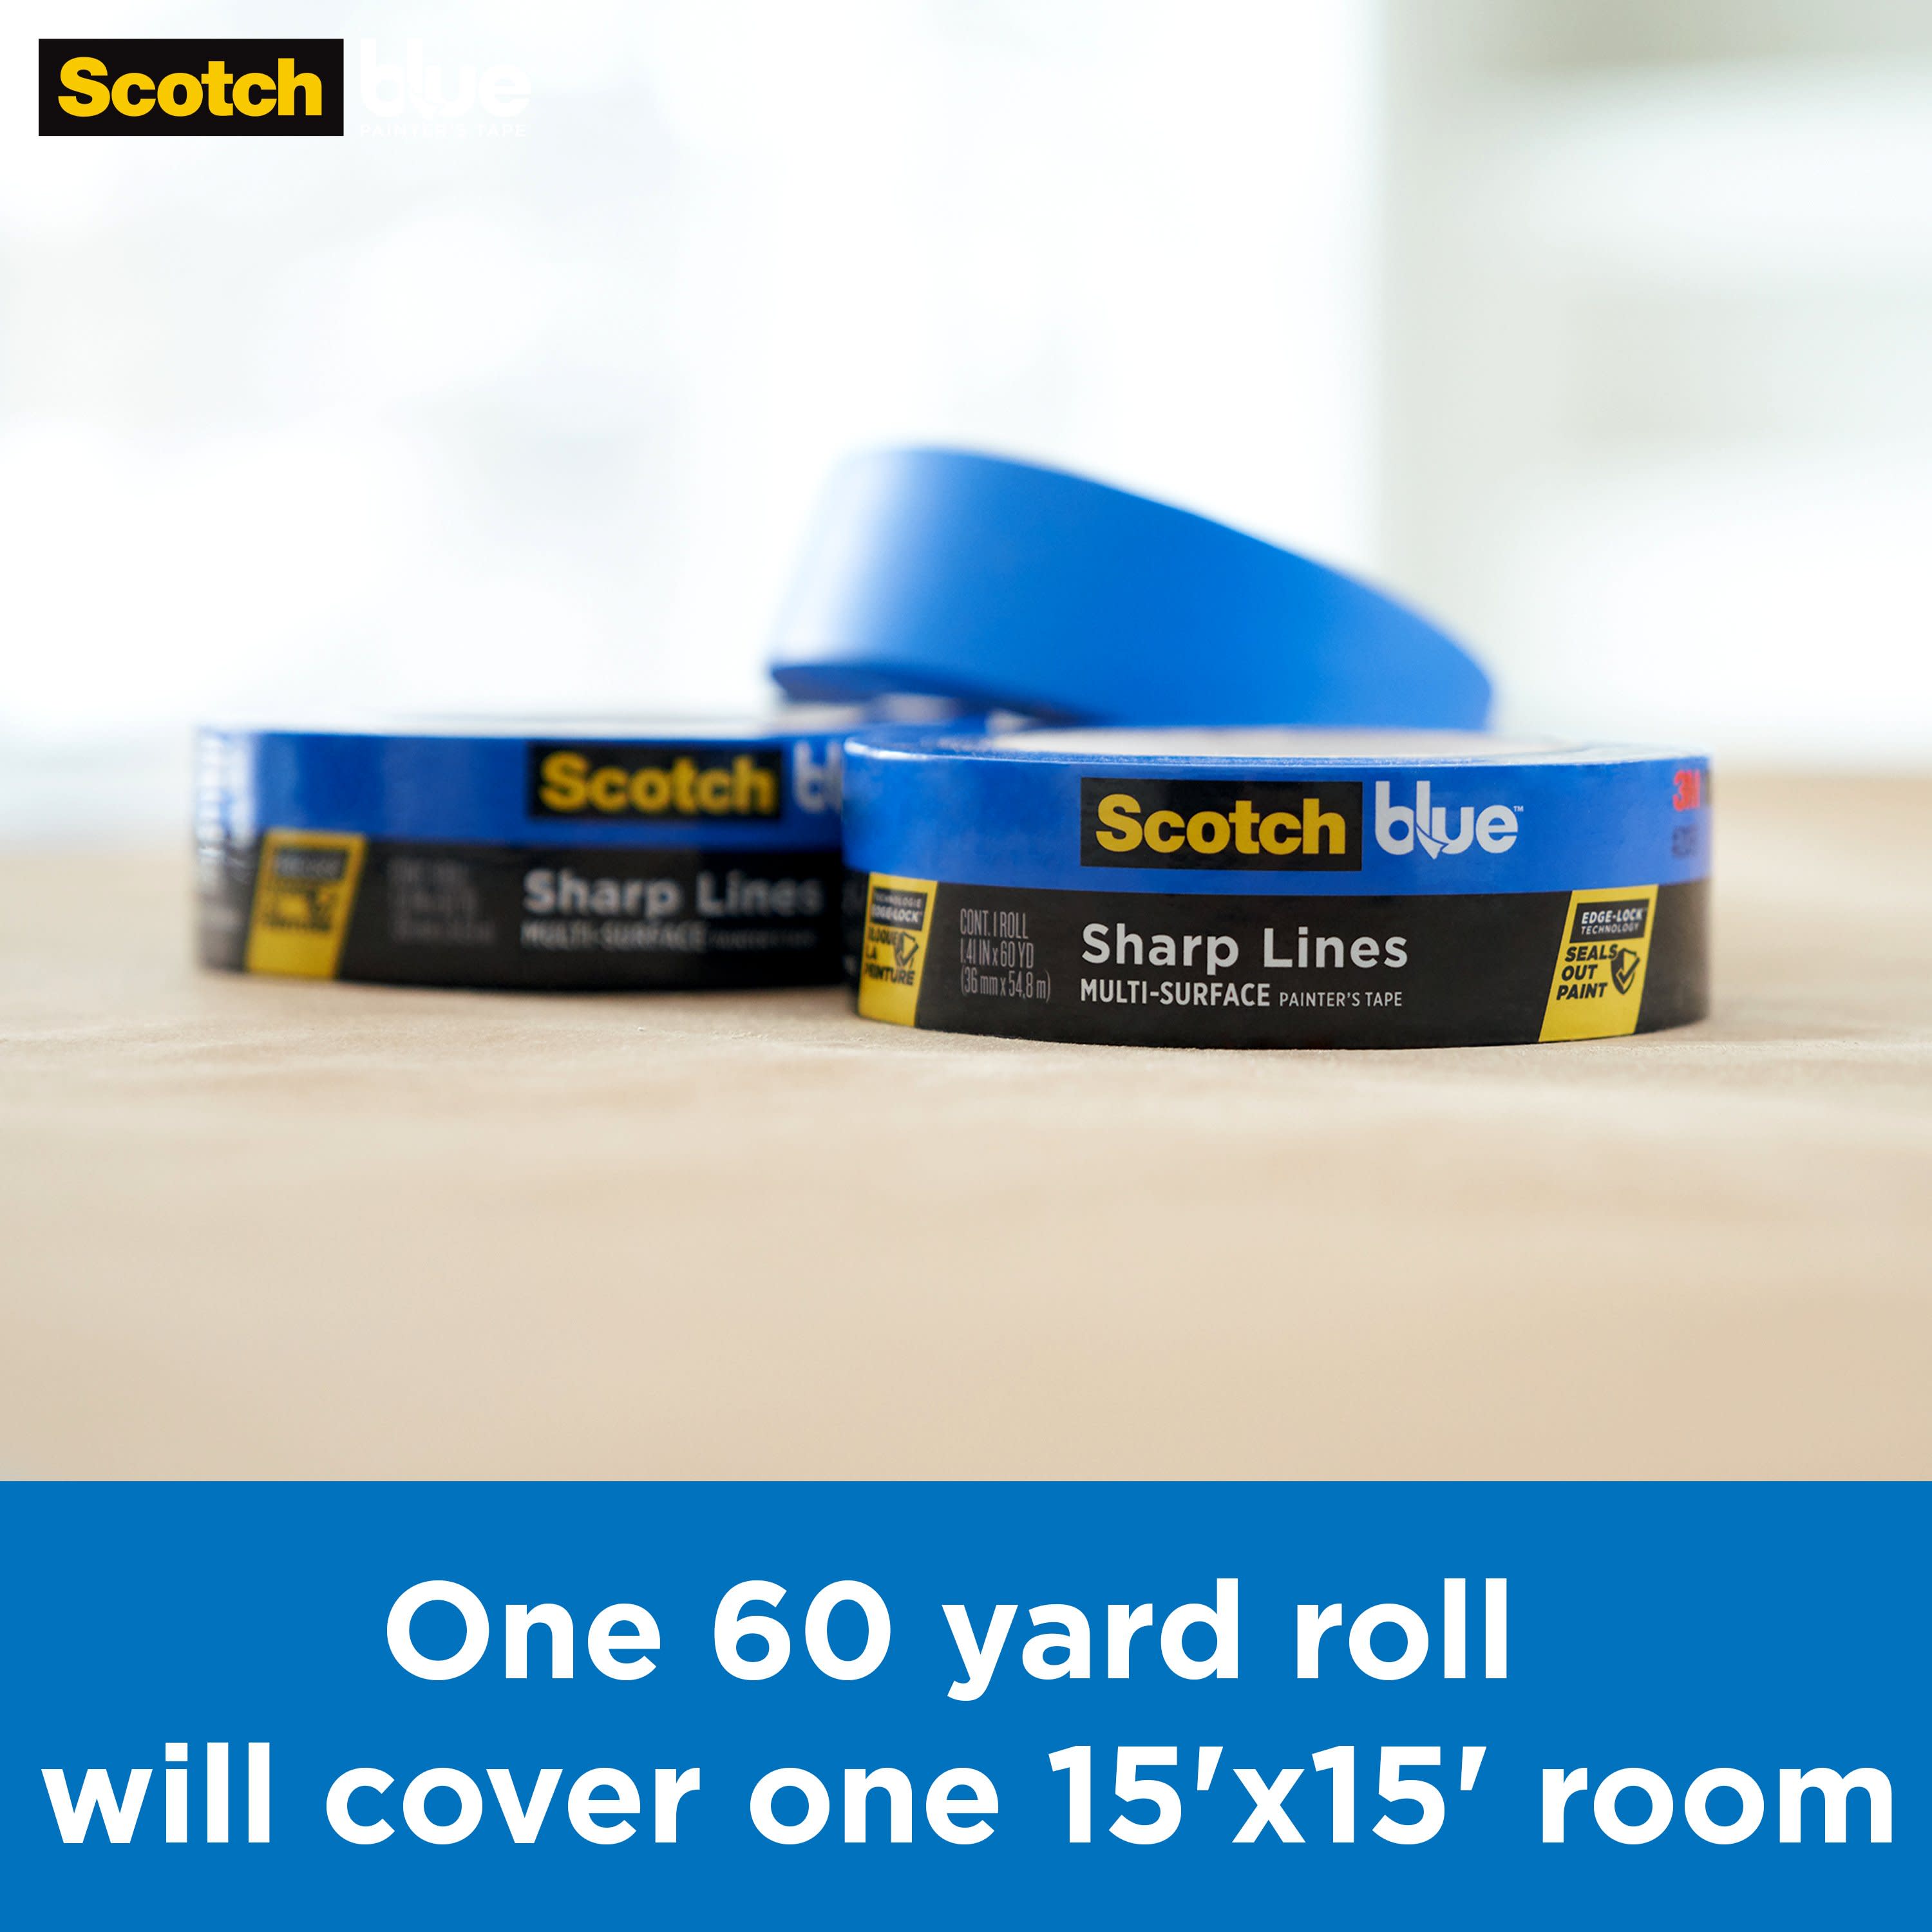 Painter's Tape for Patterns - Learn How from ScotchBlue™ Brand